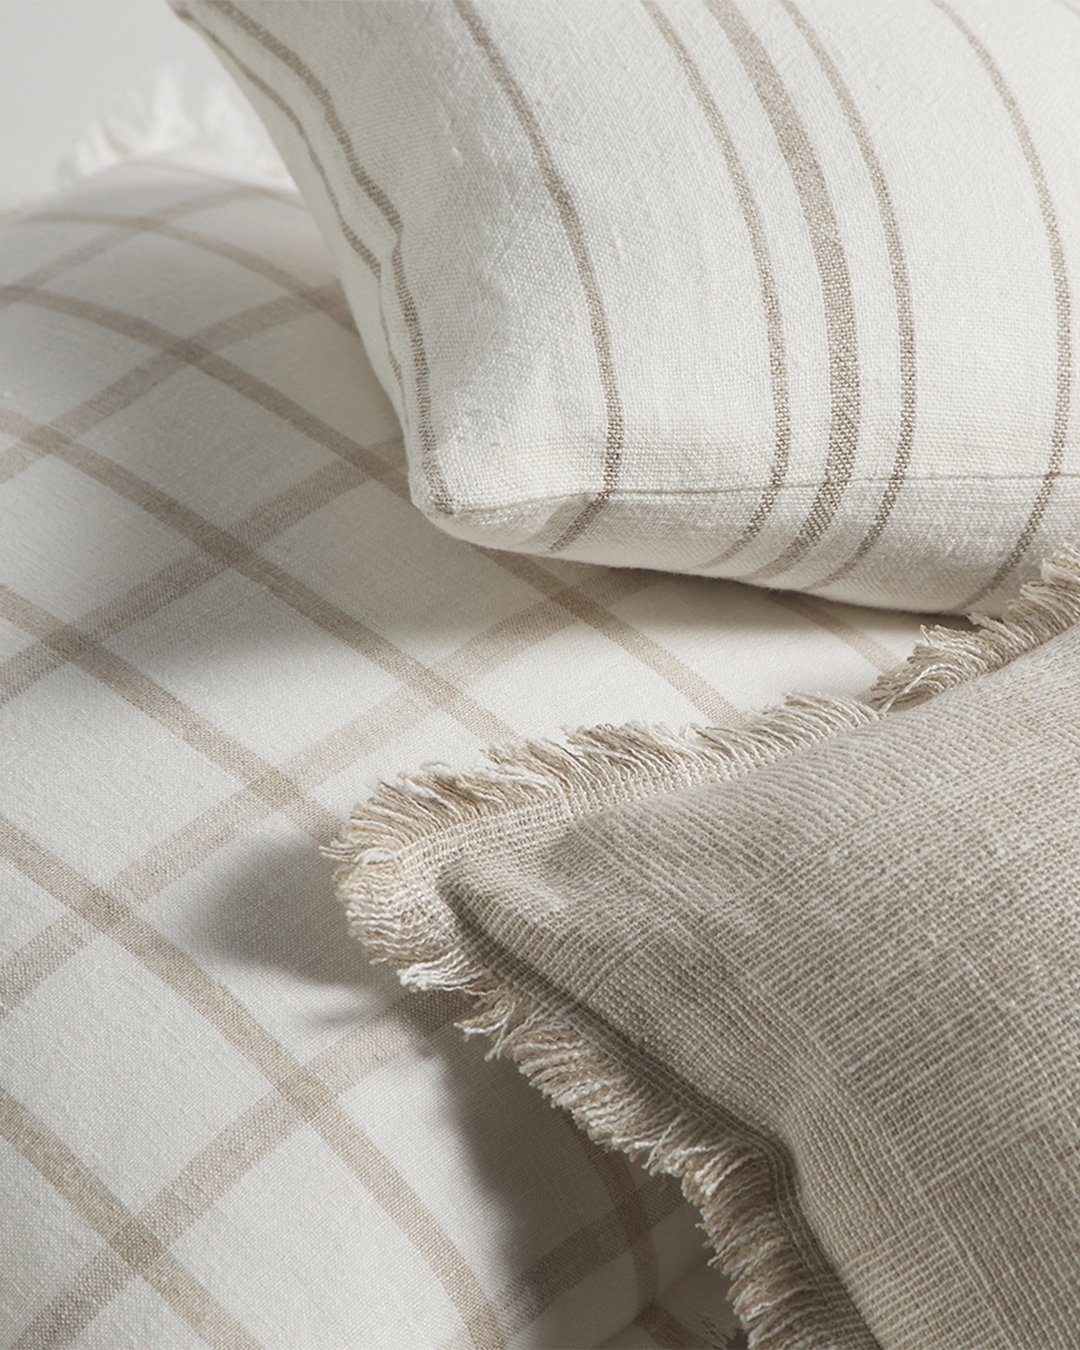 🤍 Brentwood - One of many stunning new collections for 2024 featuring beautifully soft natural tones with a nod to country-inspired living.⁣

In stock and available to order today. Explore all our cushion collections via the link in our bio. ✧